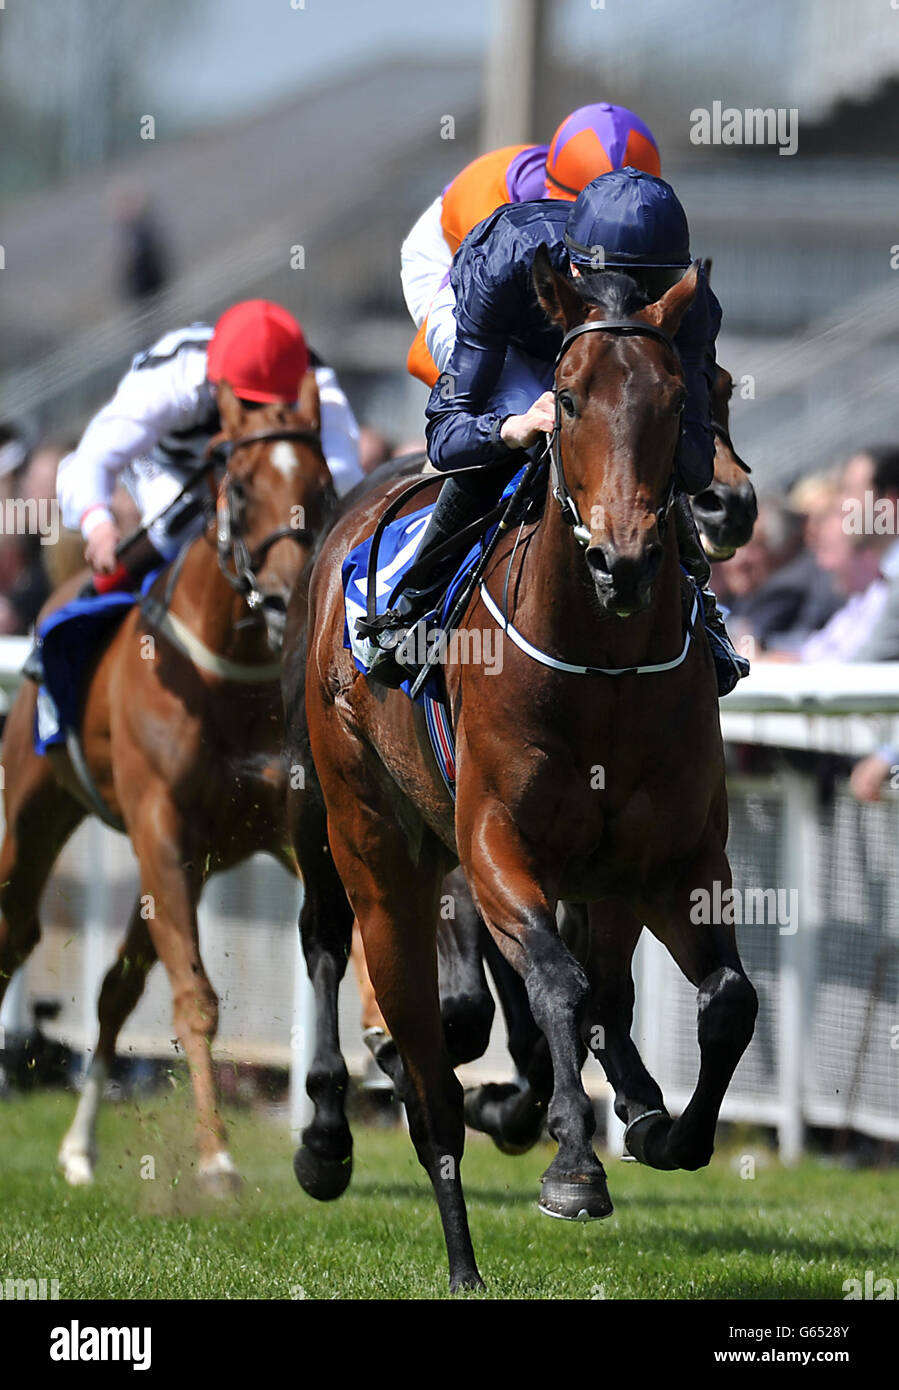 Coach House ridden by Joseph O'Brien wins the Cold Move European Breeders Fund Marble Hill Stakes during the Tattersalls Irish 2000 Guineas Day at Curragh Racecourse, County Kildare. Stock Photo